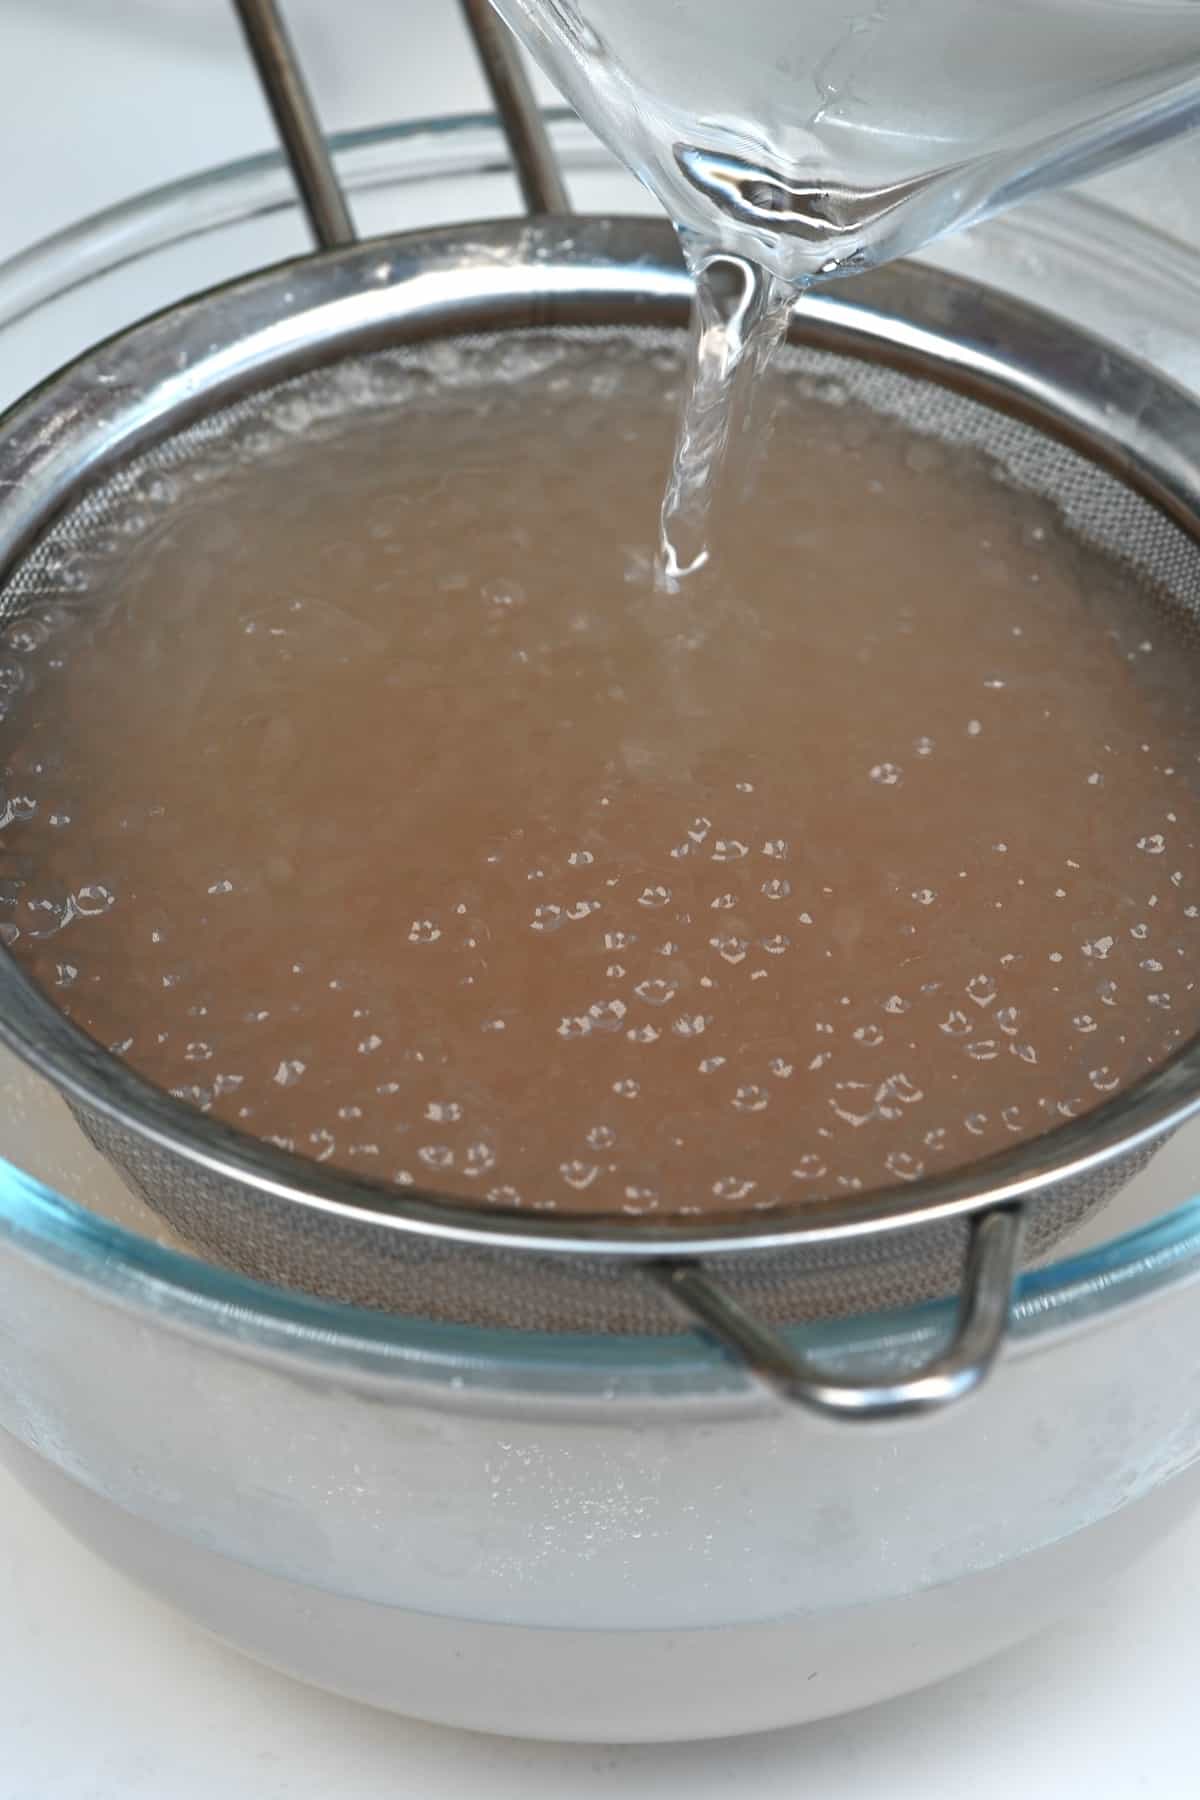 Rinsing cooked sago pearls